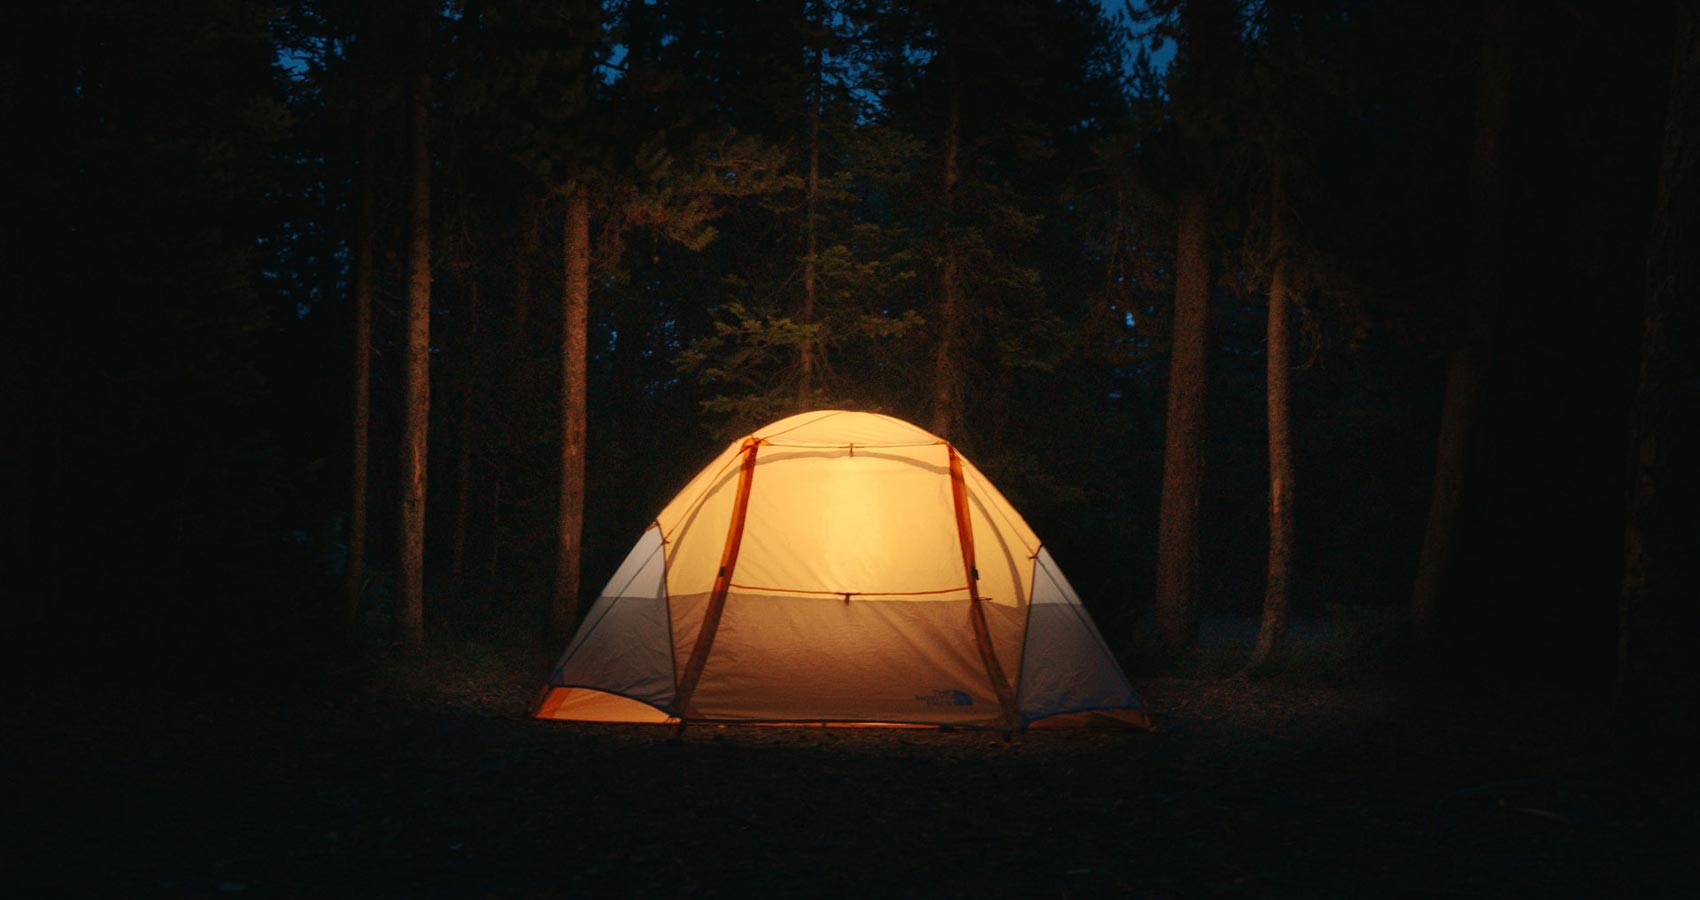 Lights Out Camping, a flash fiction by A.L. Paradiso at Spillwords.com